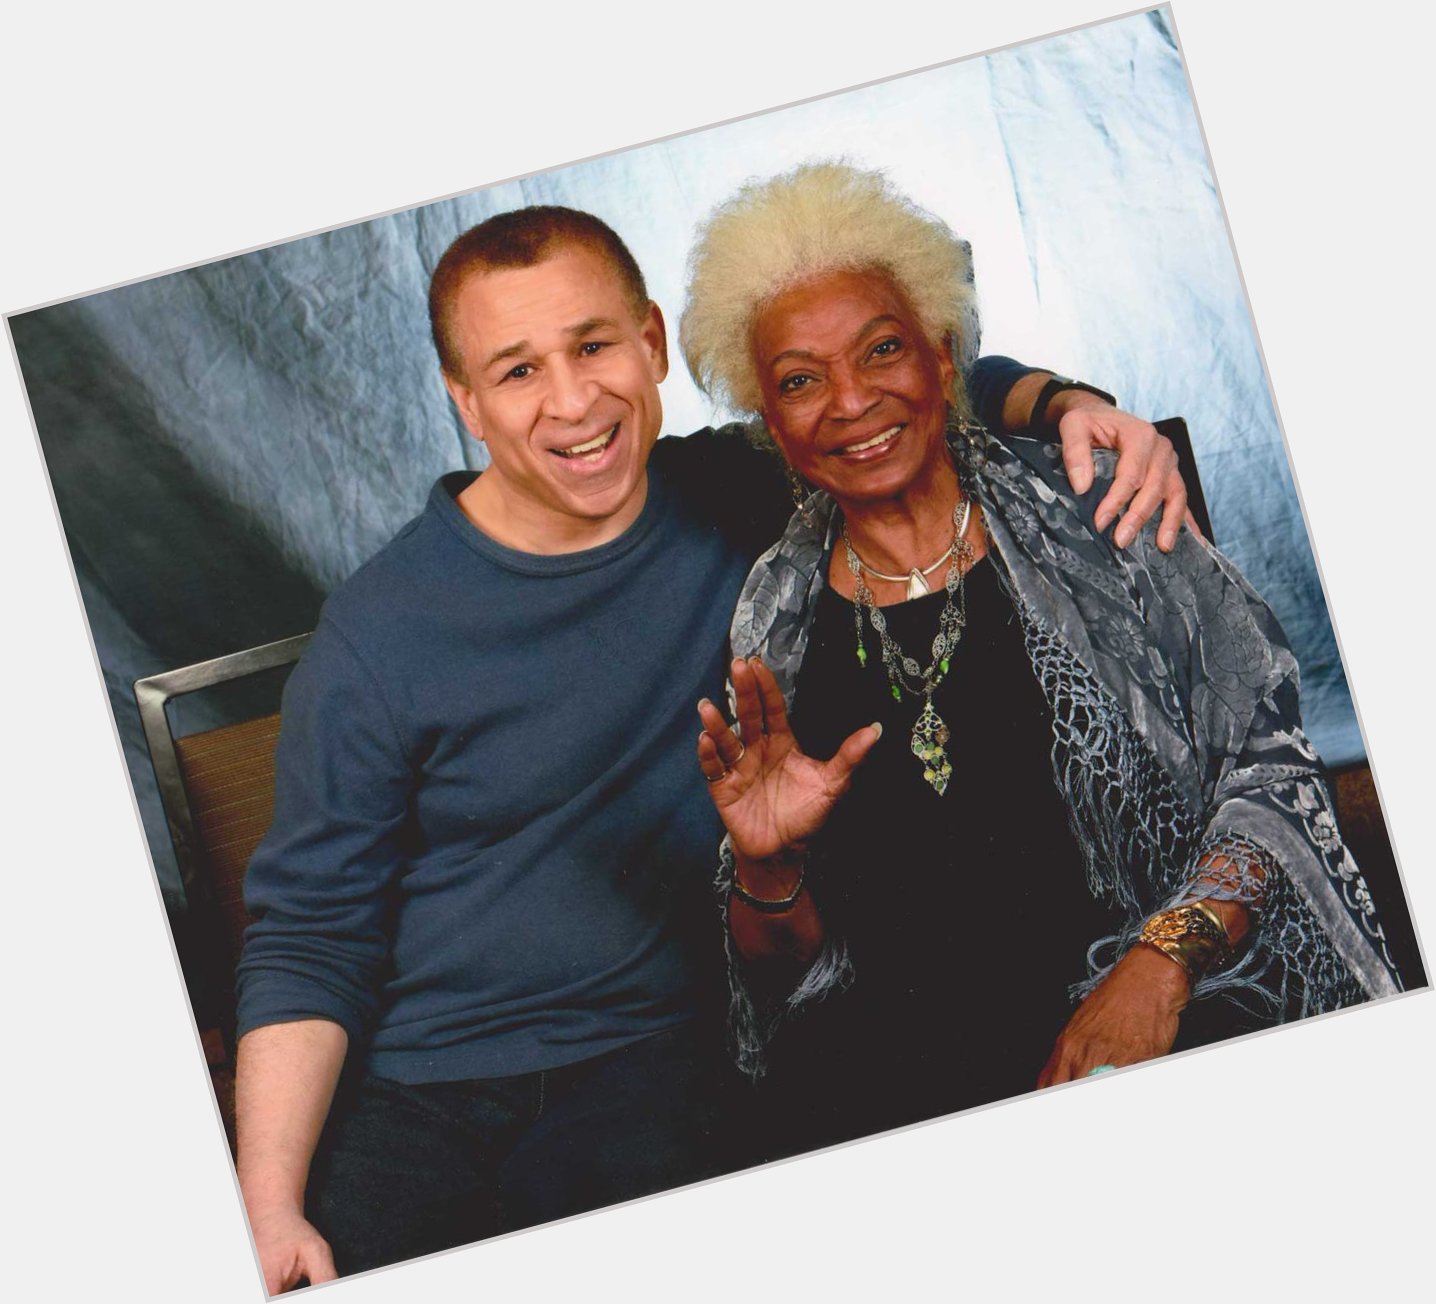 Happy 86th Birthday today to the first-lady of the STAR TREK universe, NICHELLE NICHOLS!! 